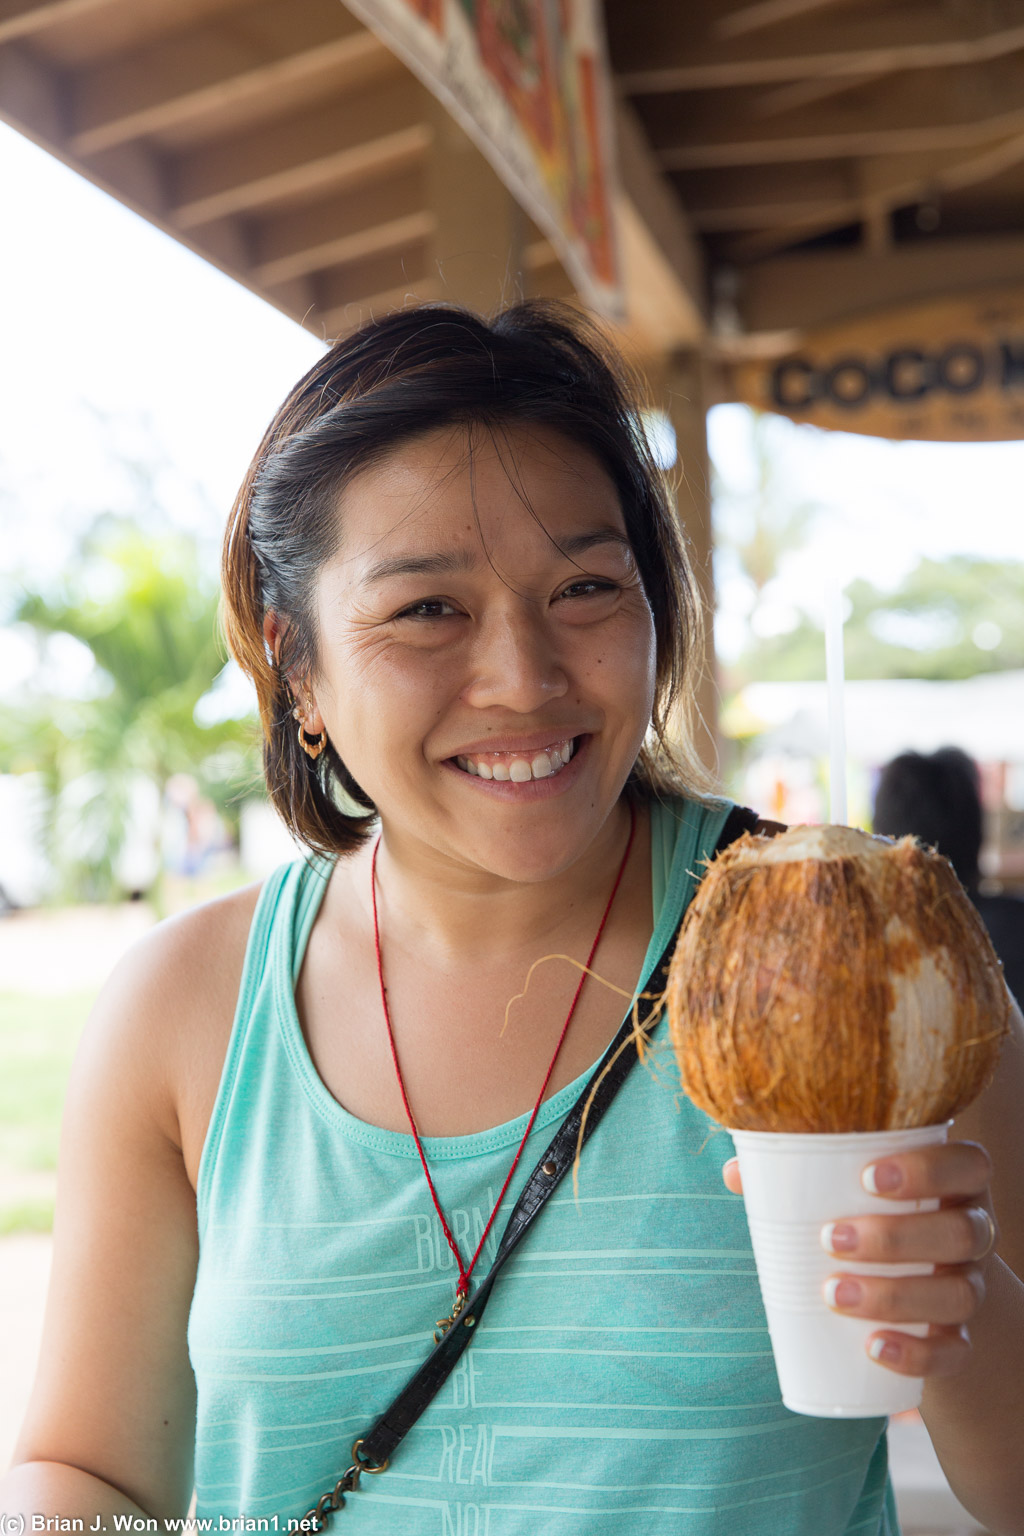 Kaitie decided it was time to try a coconut.